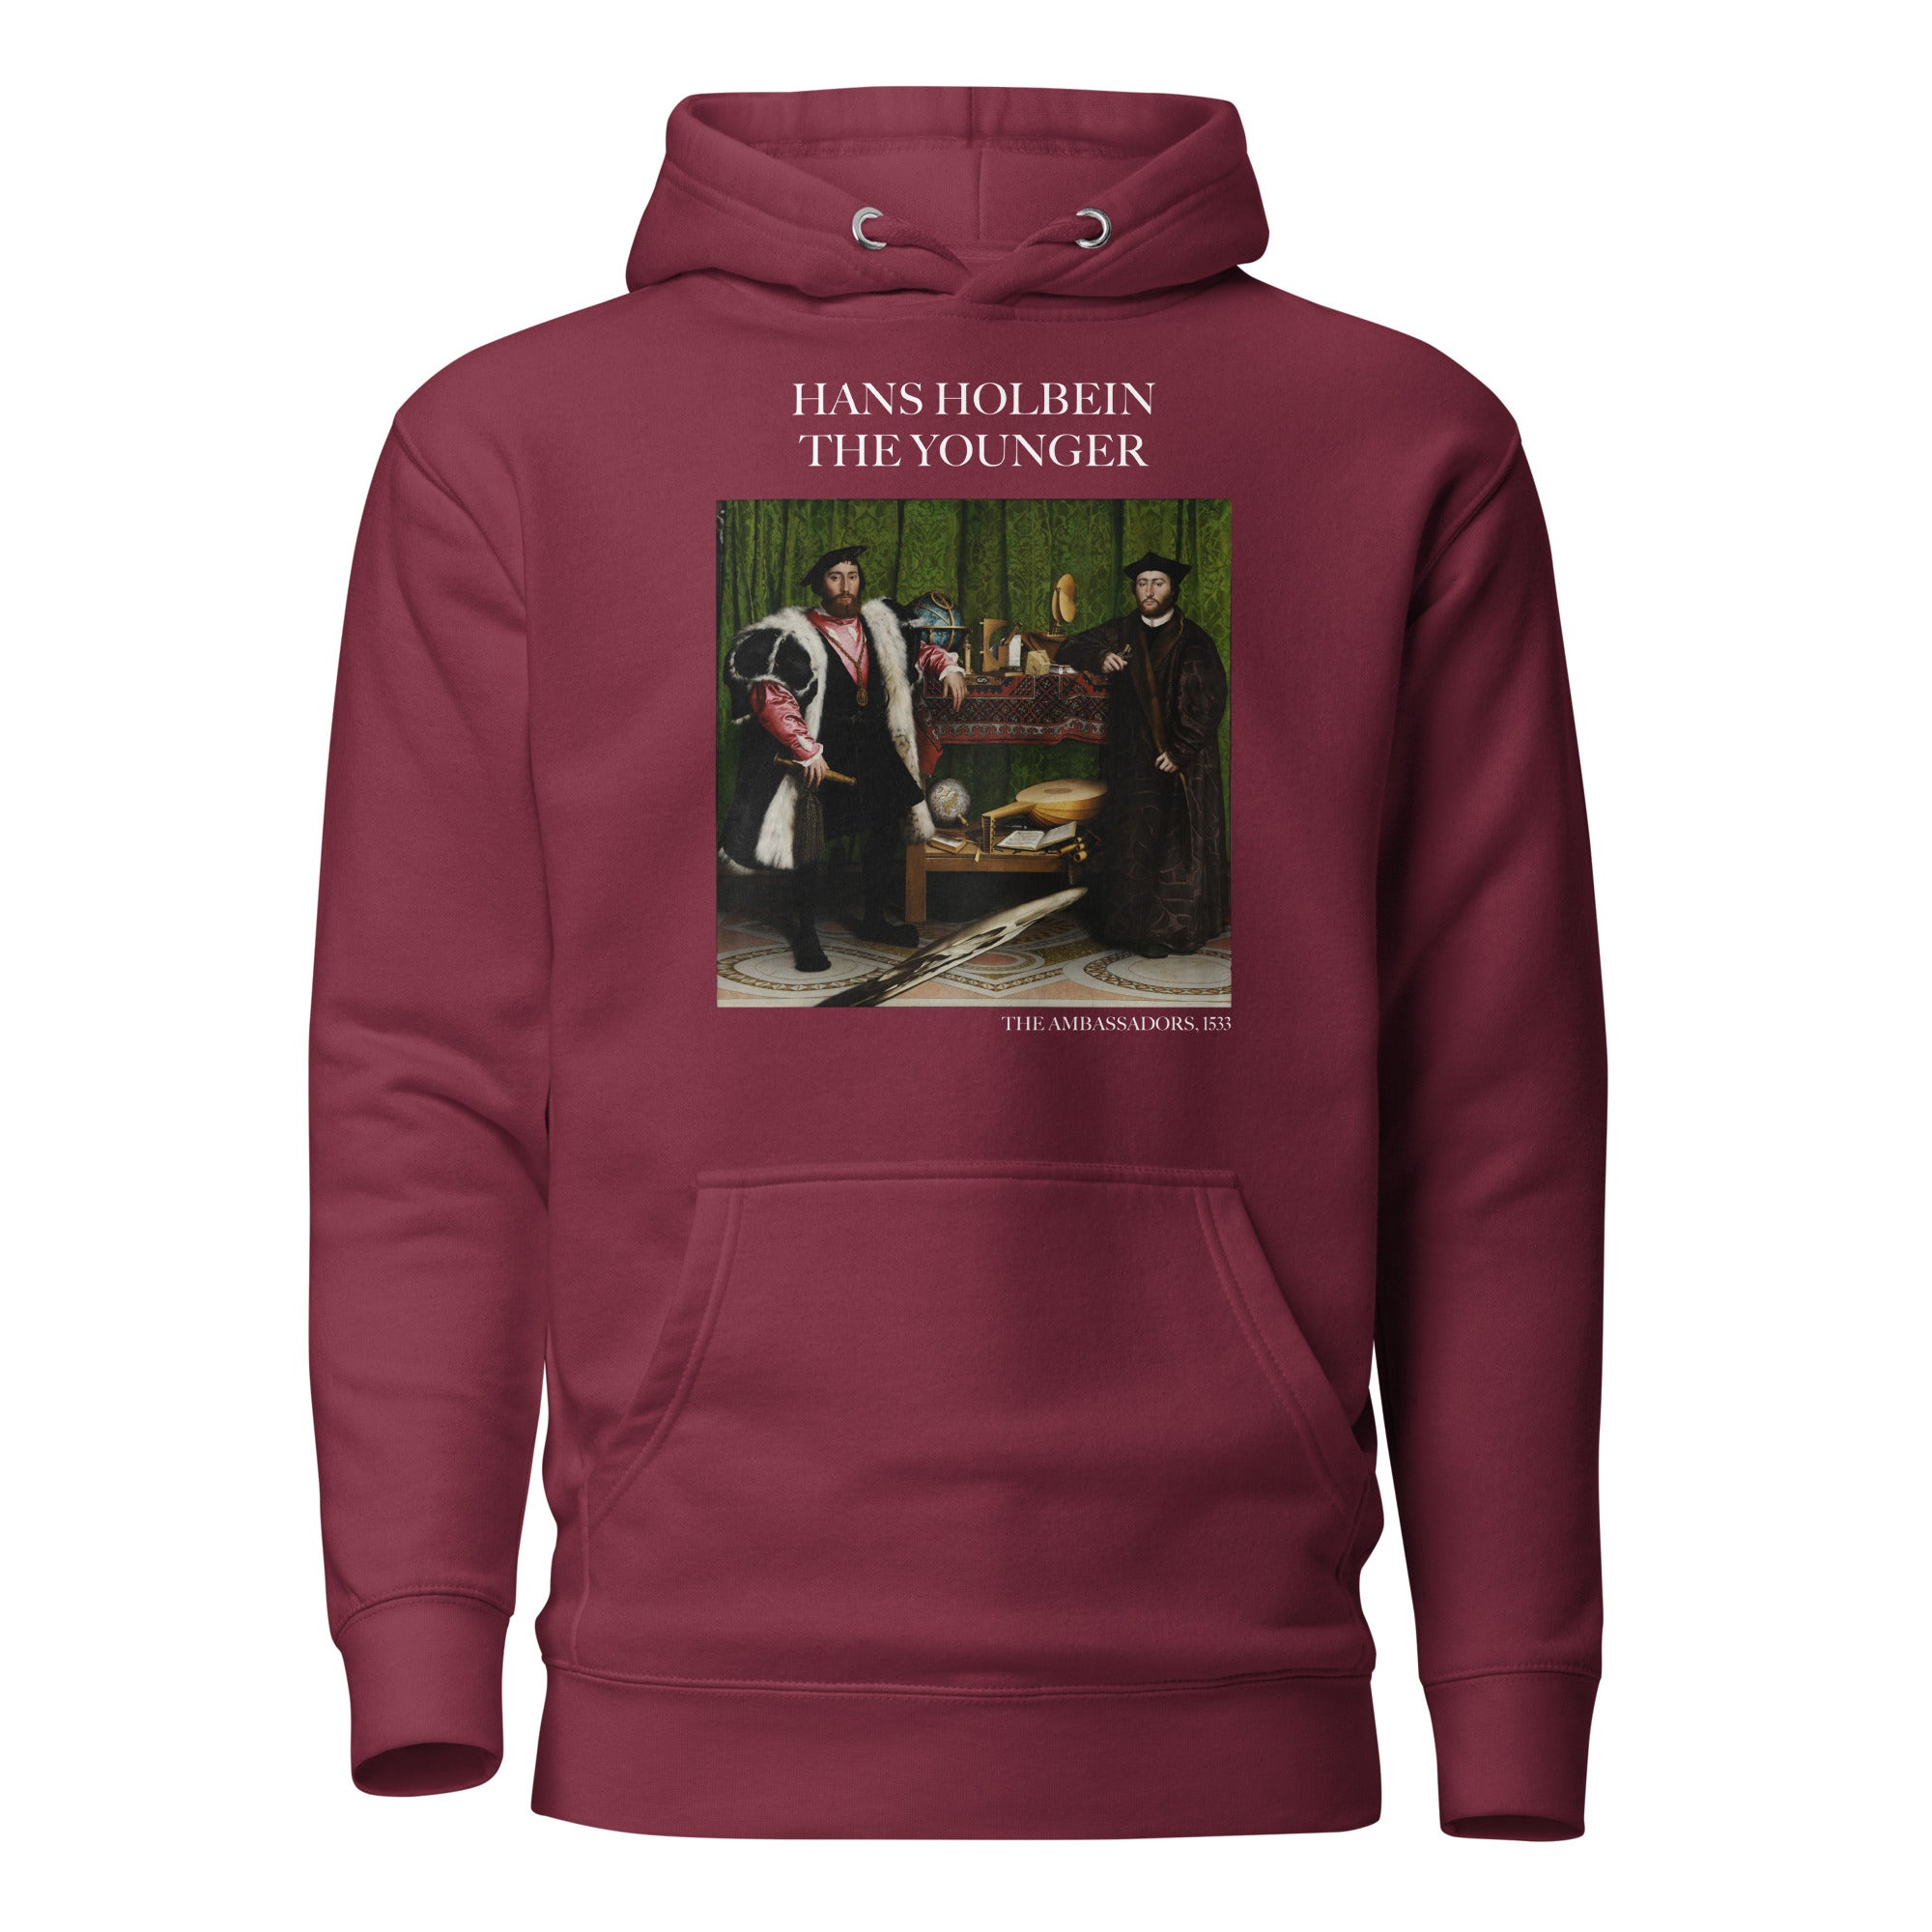 Hans Holbein the Younger 'The Ambassadors' Famous Painting Hoodie | Unisex Premium Art Hoodie